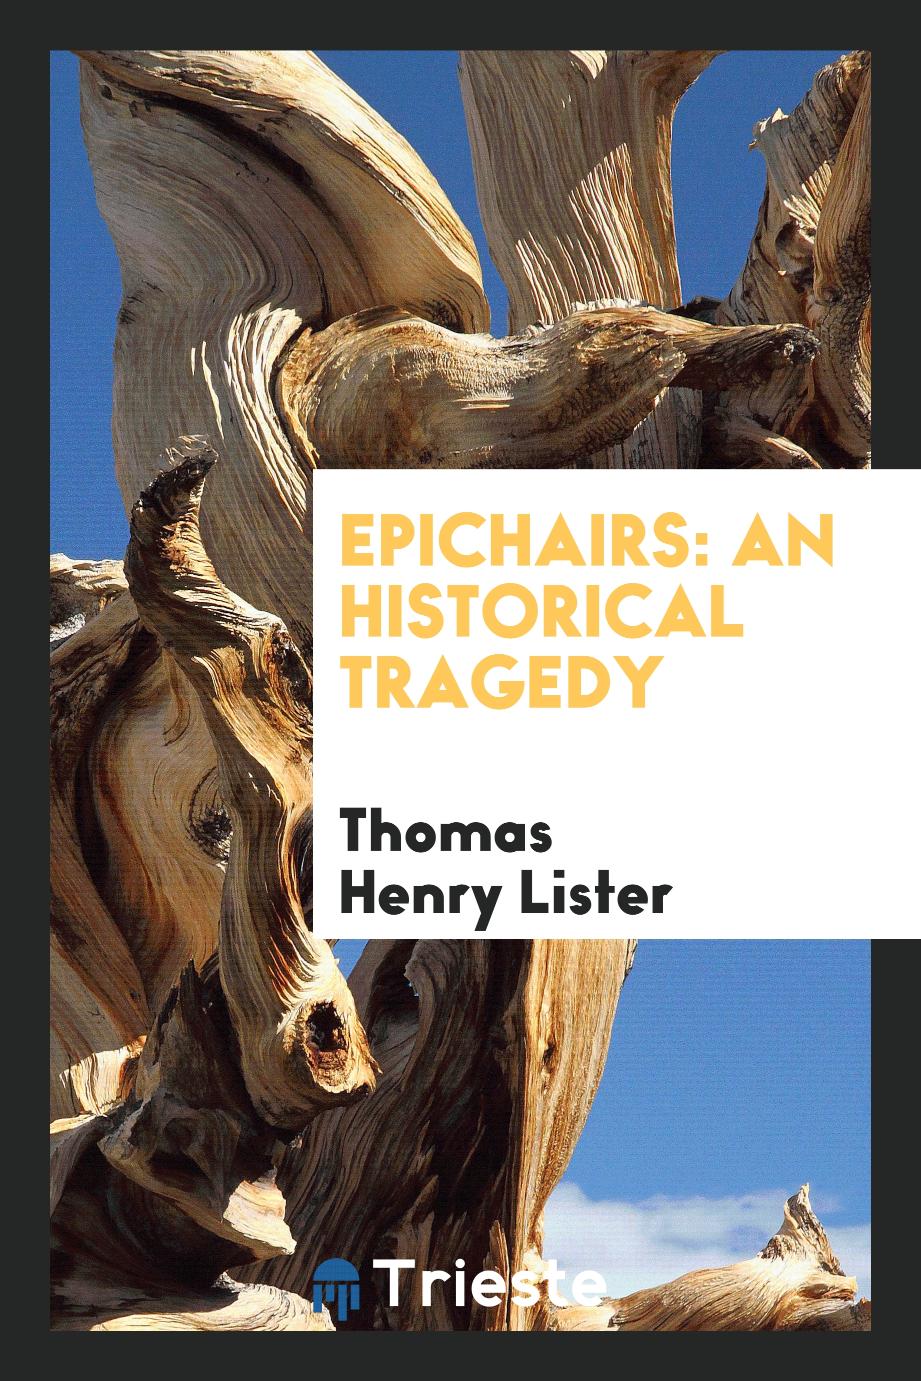 Epichairs: An Historical Tragedy